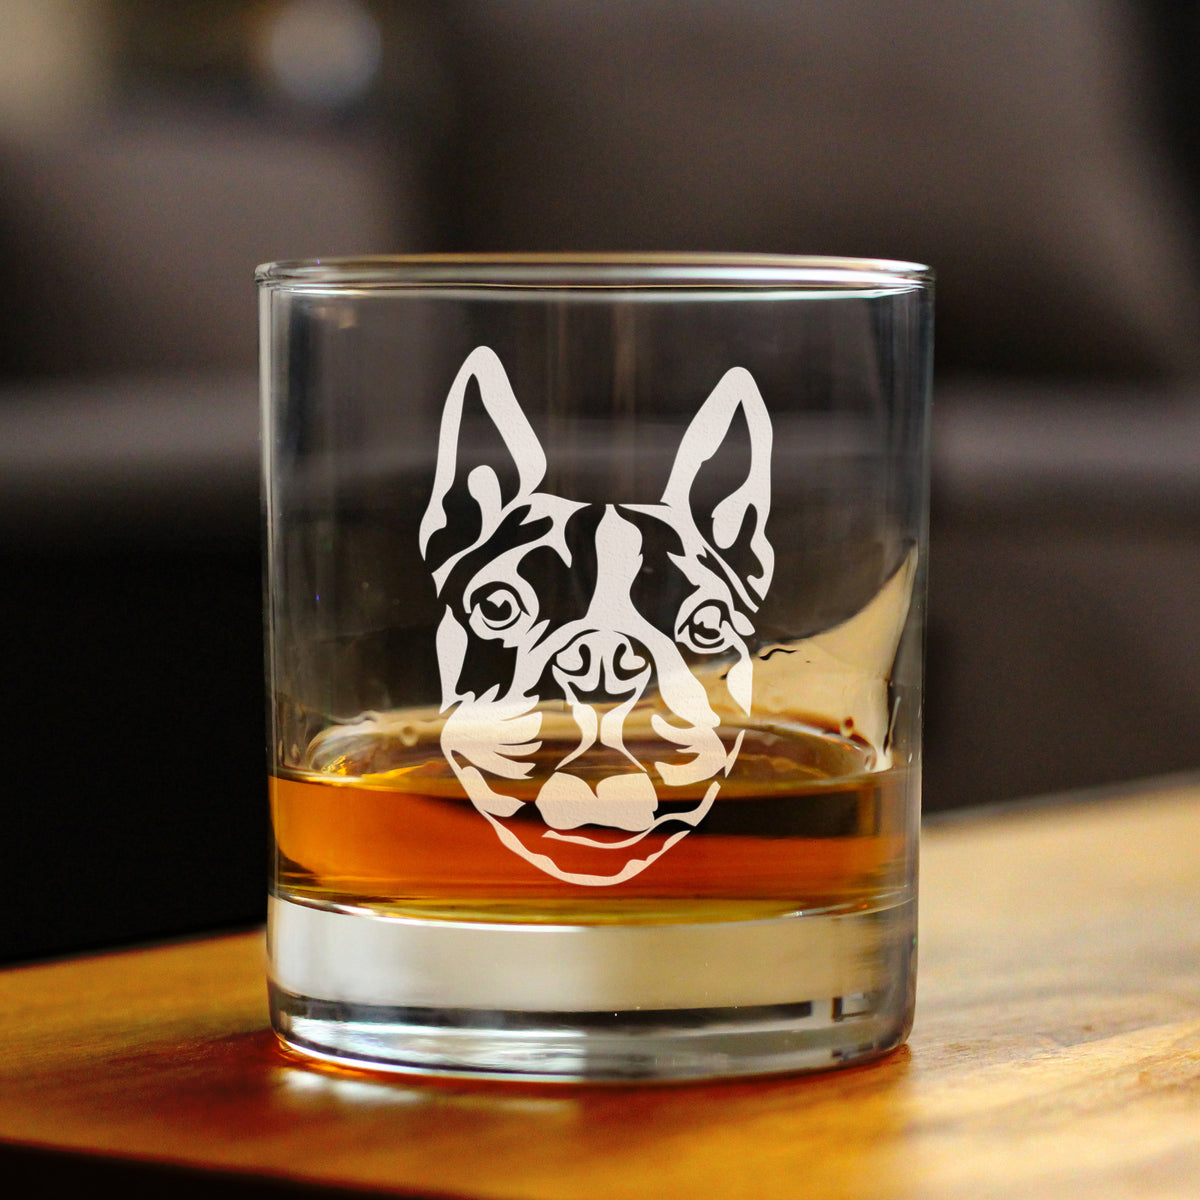 Boston Terrier Face Whiskey Rocks Glass - Unique Dog Themed Decor and Gifts for Moms &amp; Dads of Boston Terriers - 10.25 Oz